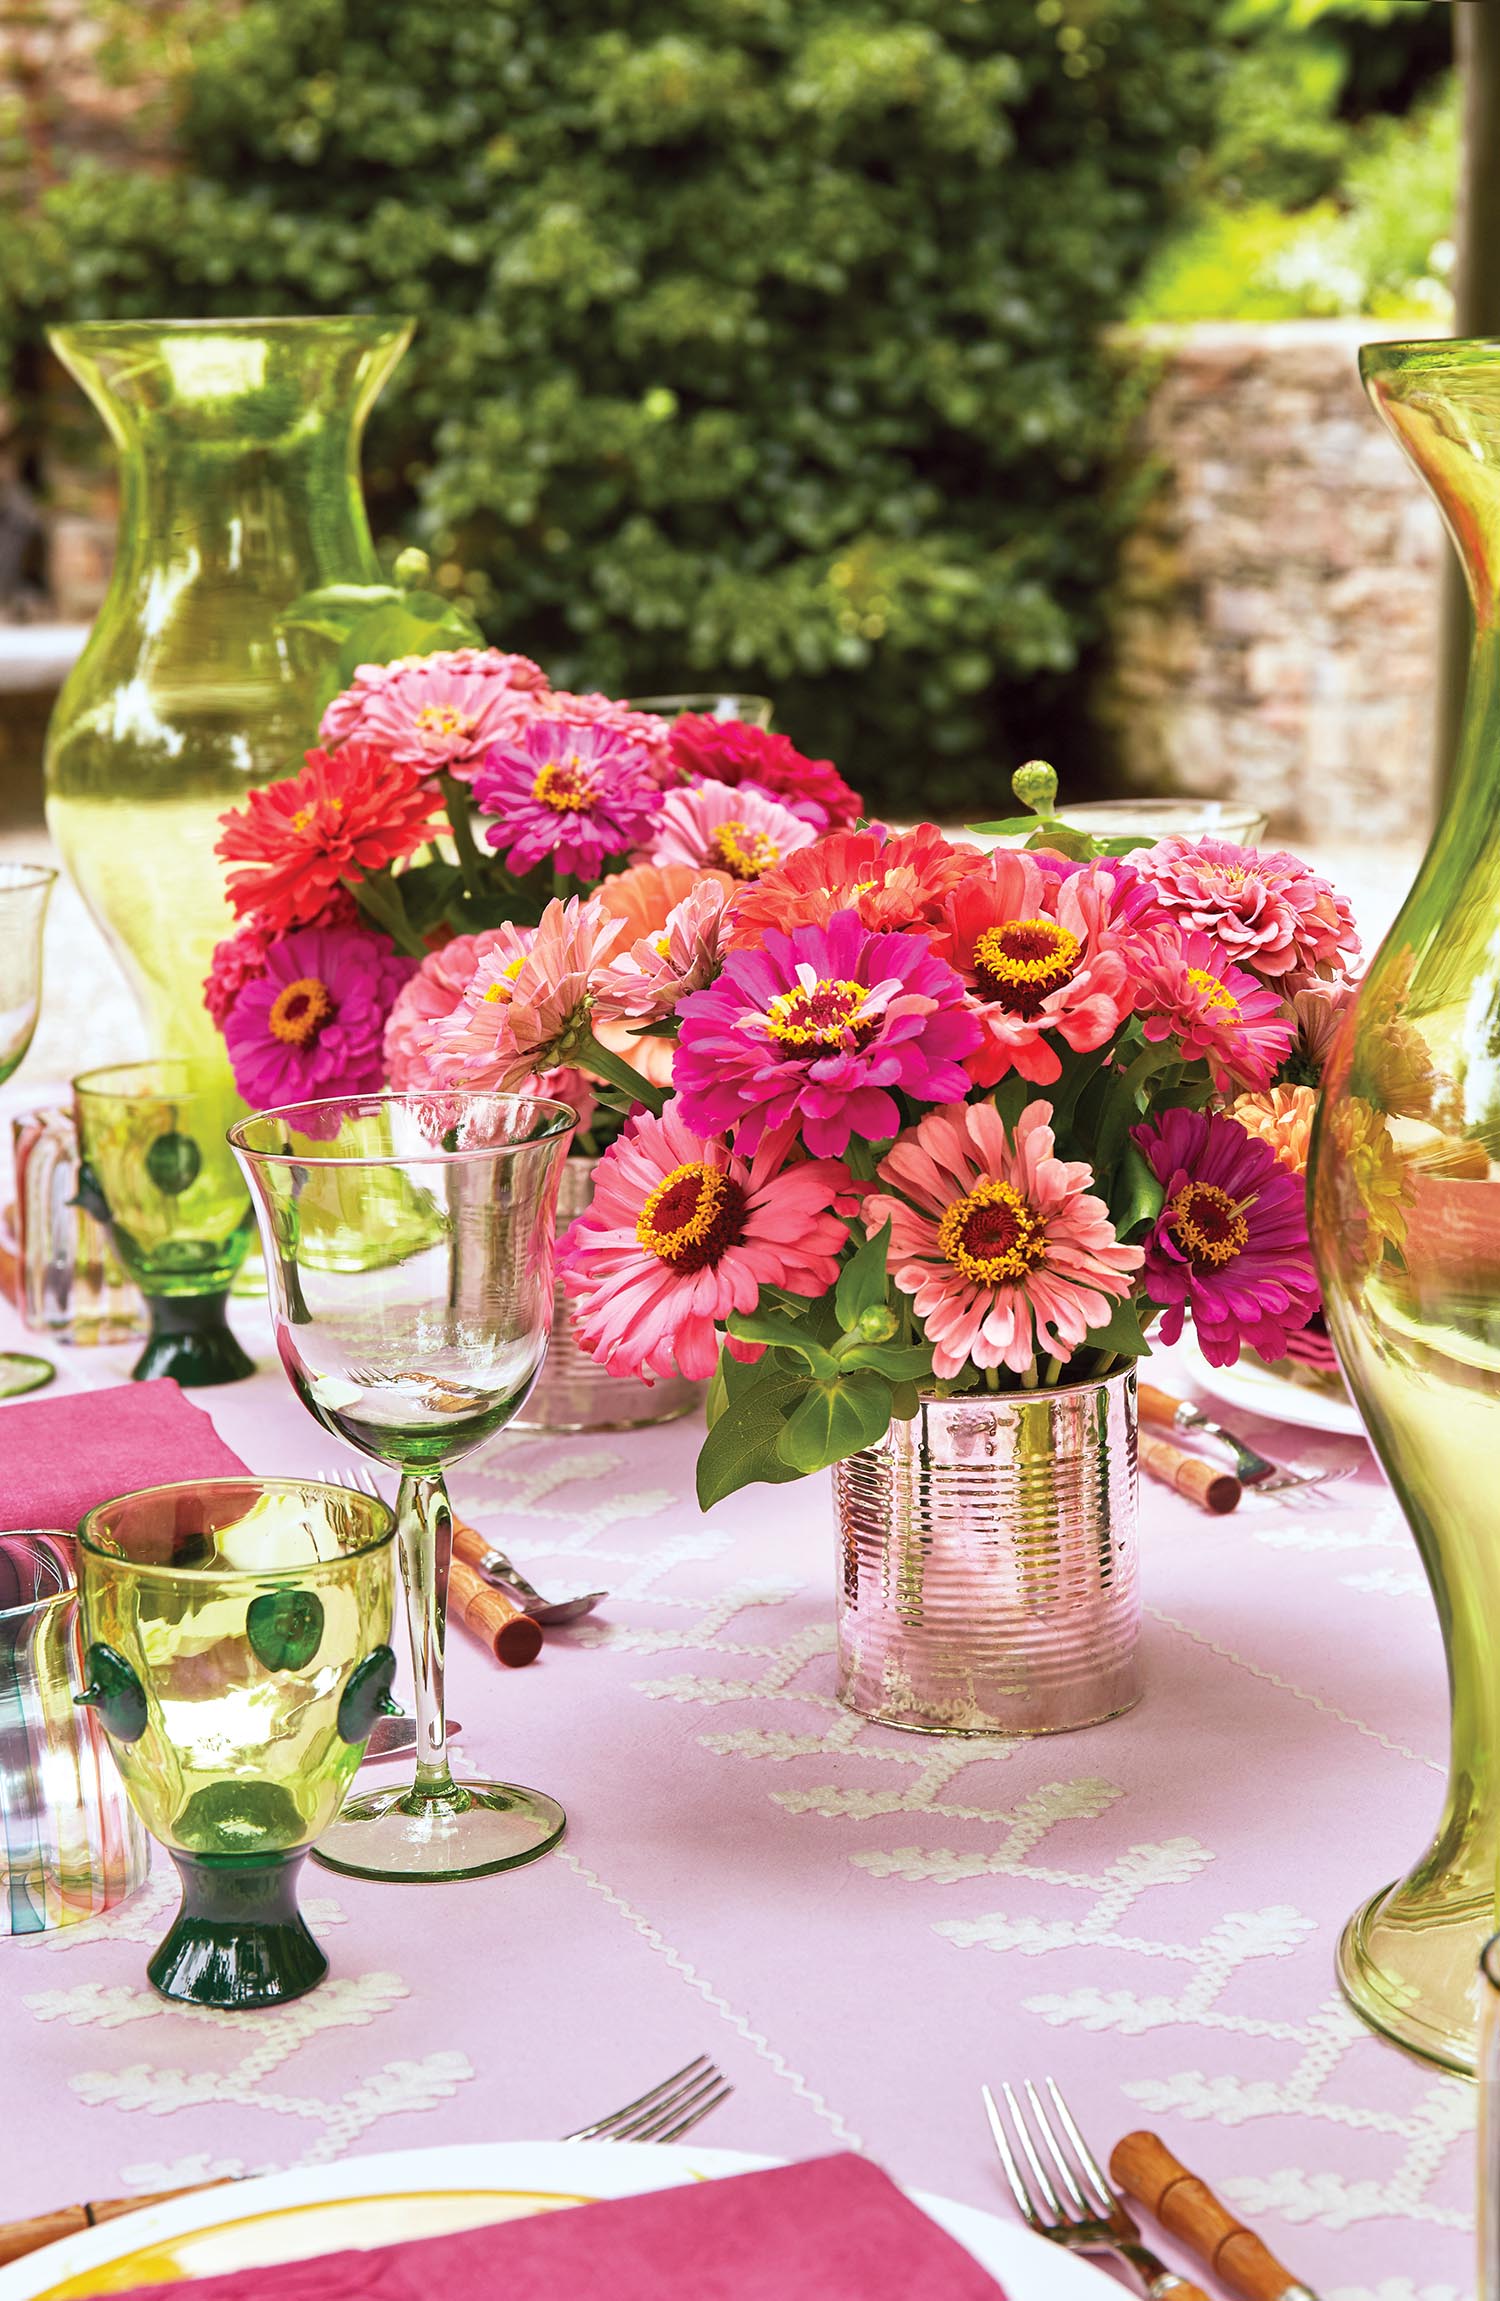 Tips for making beautiful flower arrangements – About The Garden Magazine